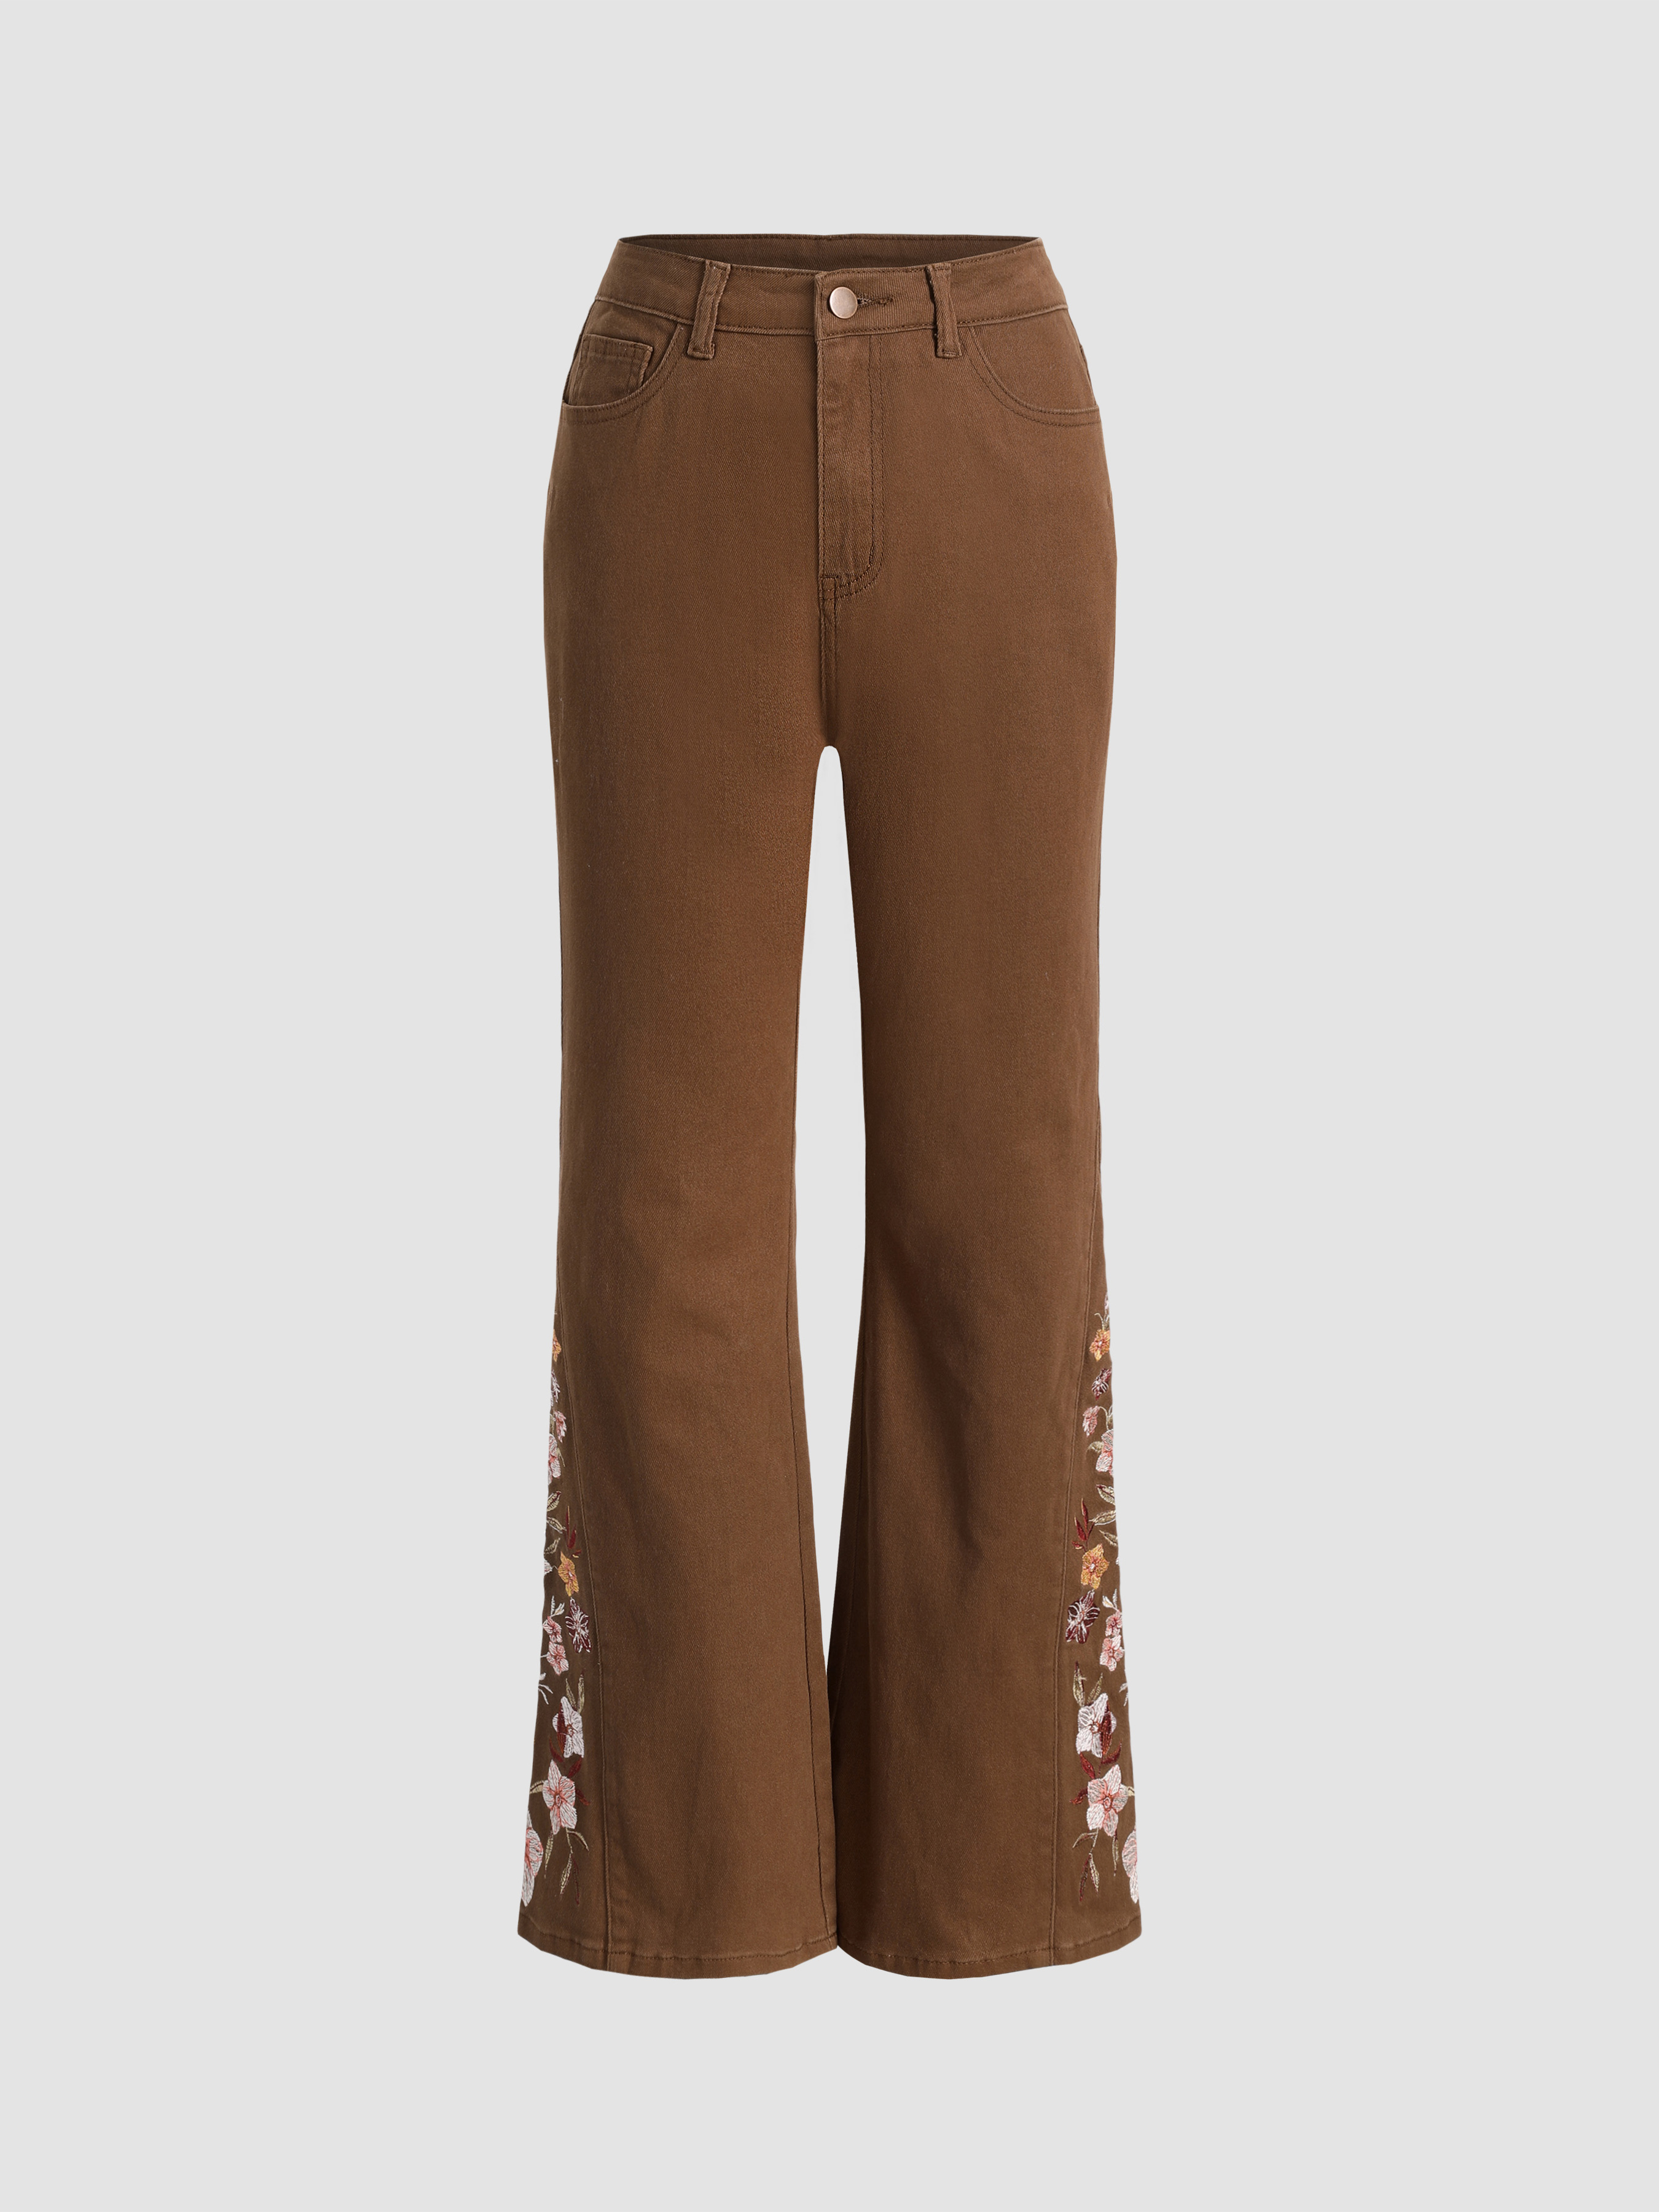 Floral Embroidery Flare Leg Jeans